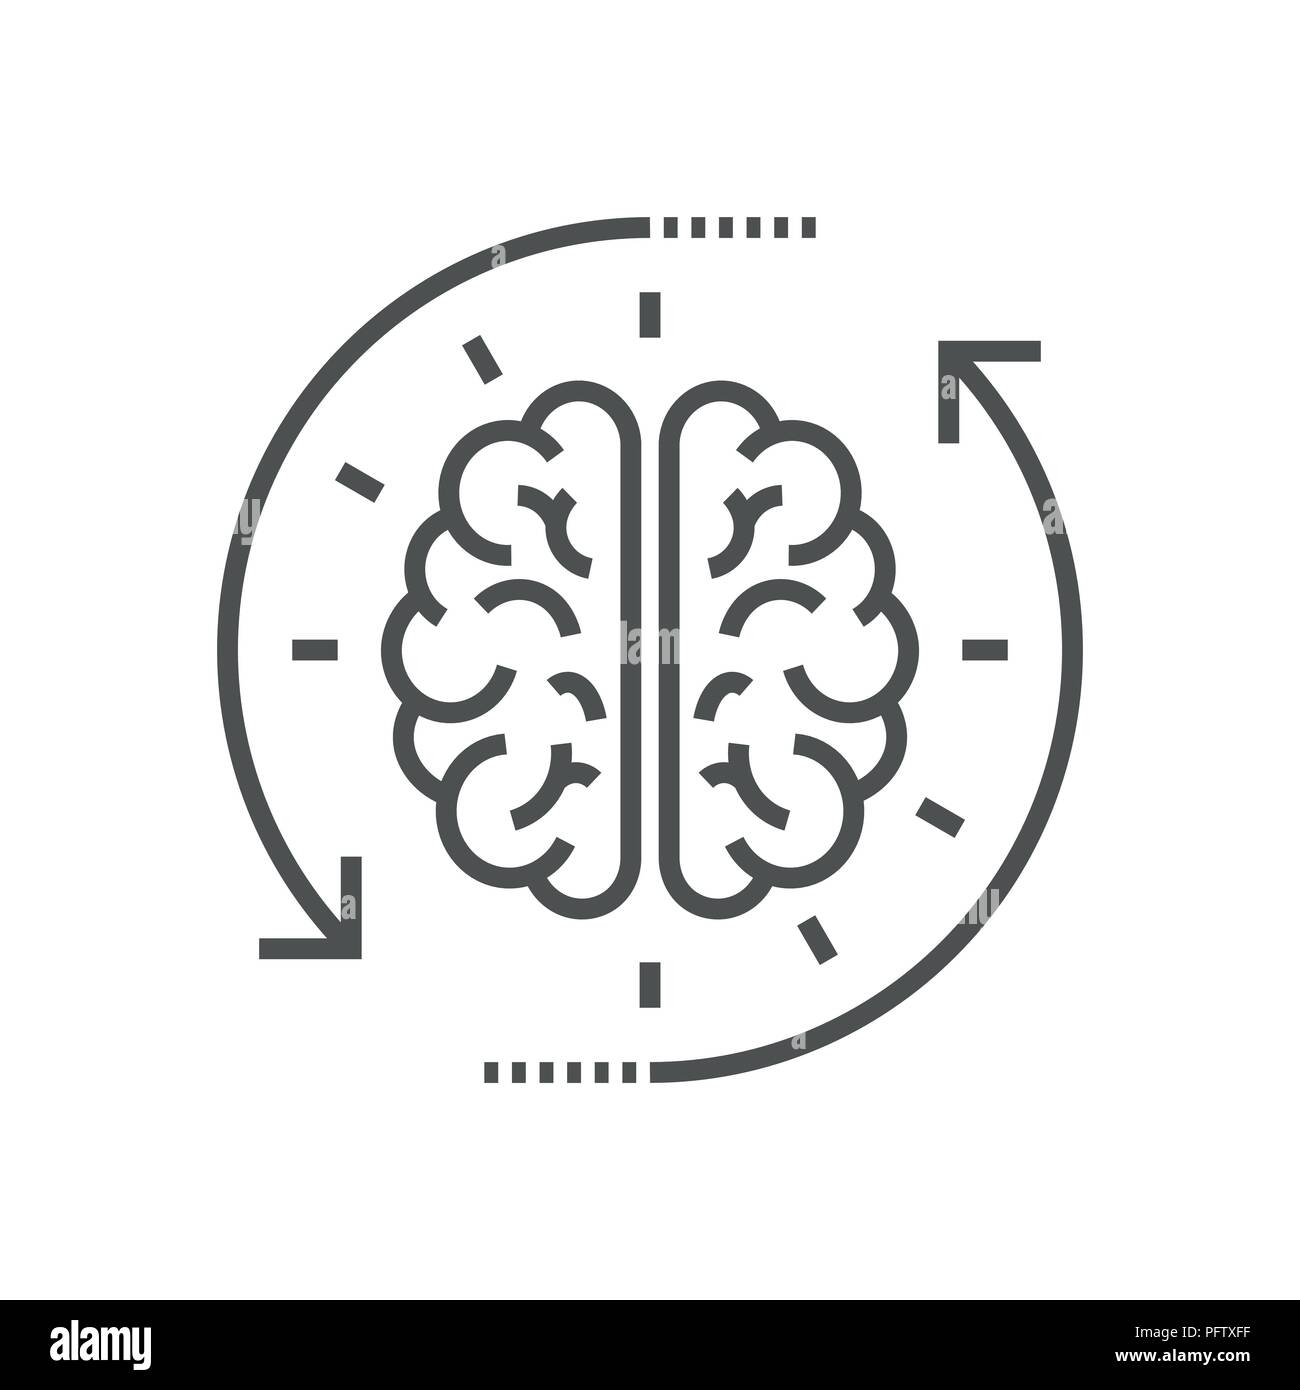 Concept Of The Thinking Process Brainstorming Good Idea Brain Activity Insight Flat Line Vector Icon Illustration Design For Your Web Design And Print Stock Vector Image Art Alamy